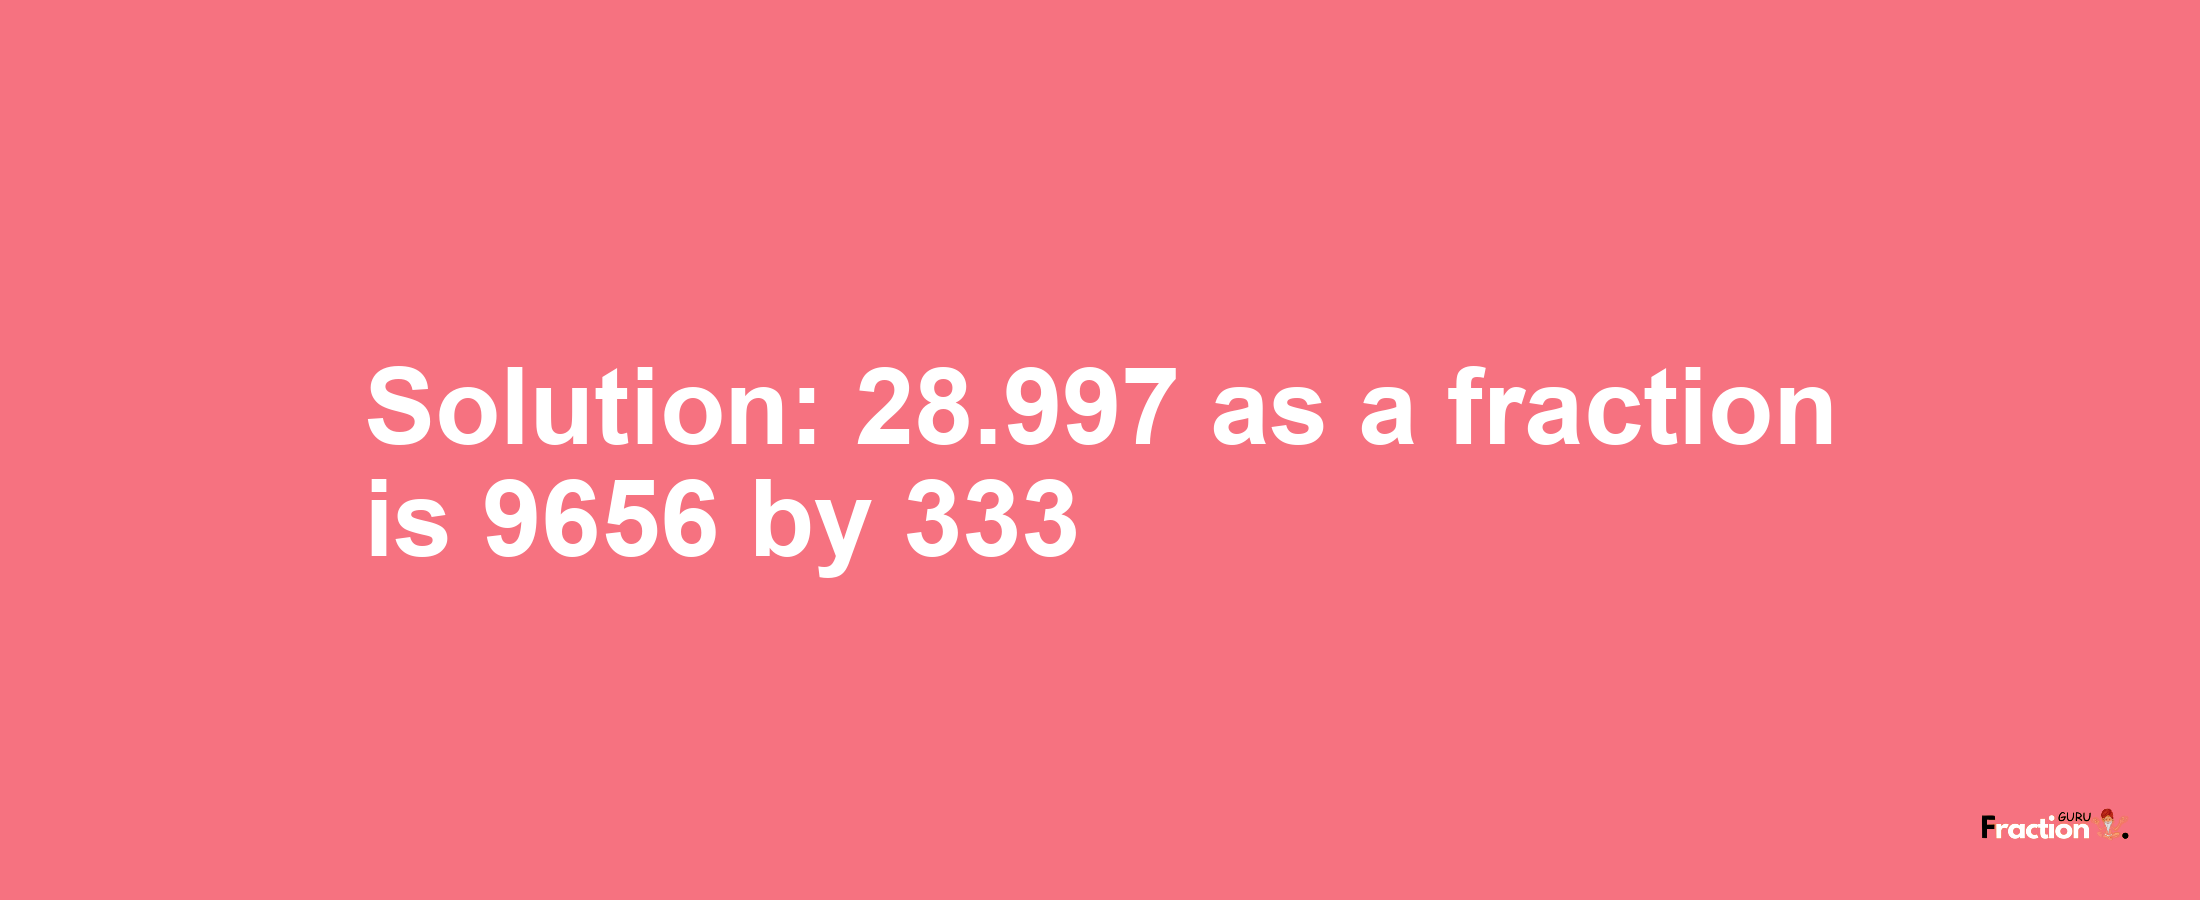 Solution:28.997 as a fraction is 9656/333